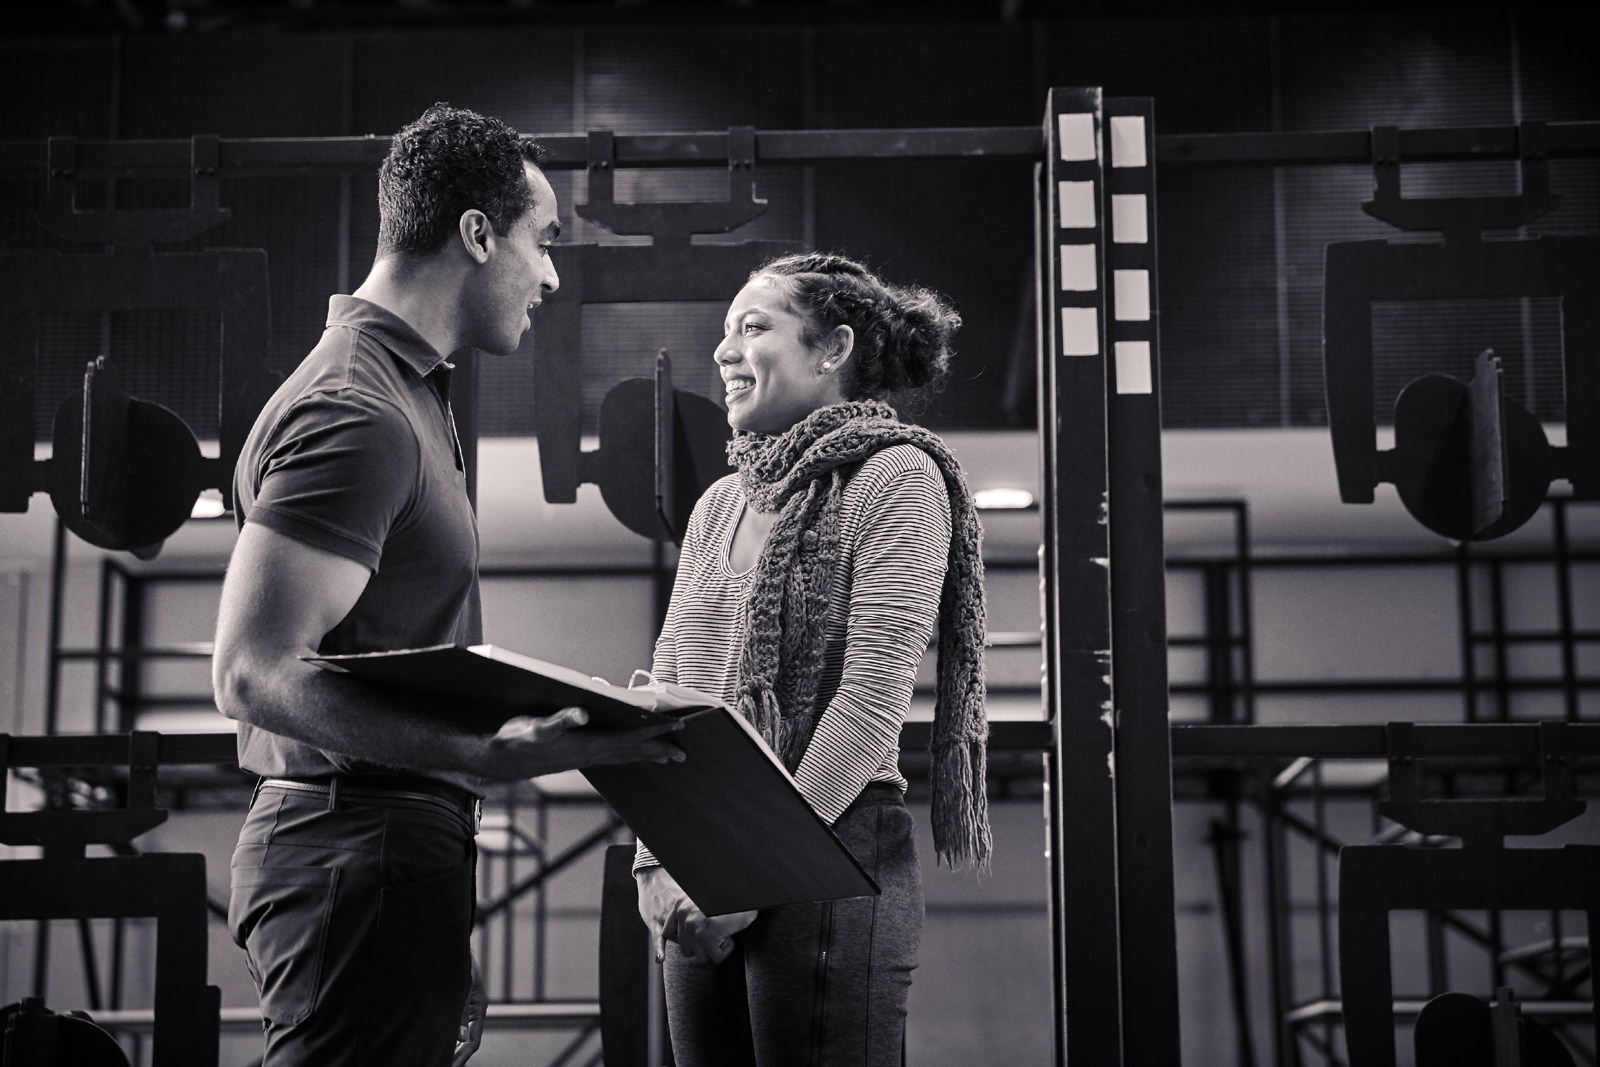 17-Joe Aaron Reid and Liisi LaFontaine in rehearsals for Dreamgirls..JPG